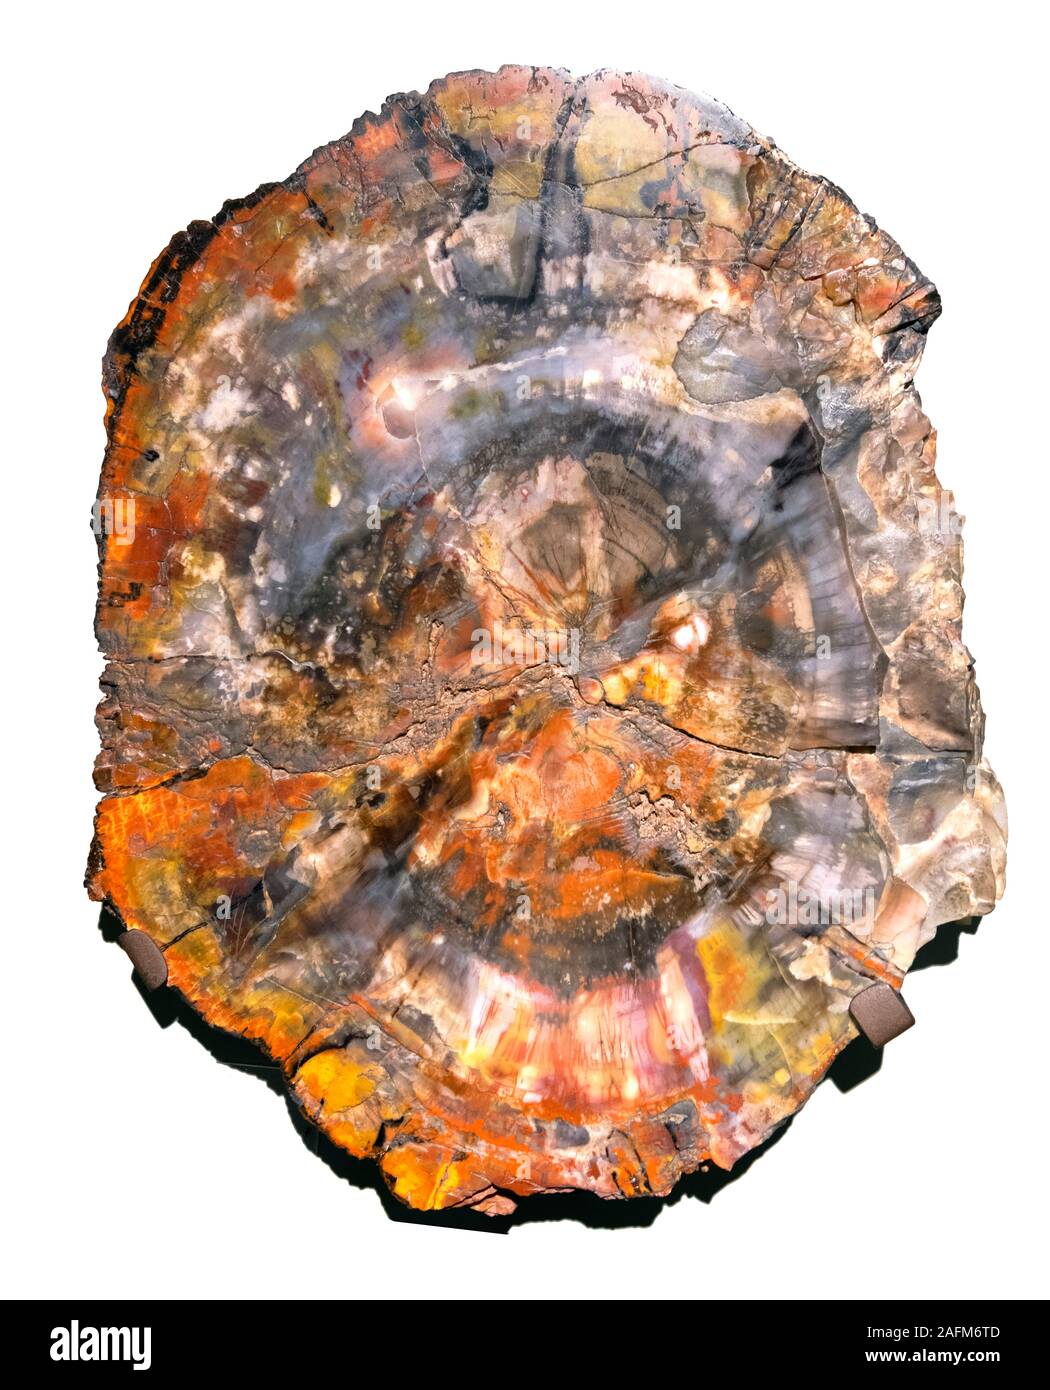 Petrified wood from Petrified Forest in Arizona, dating from Triassic period. Stock Photo